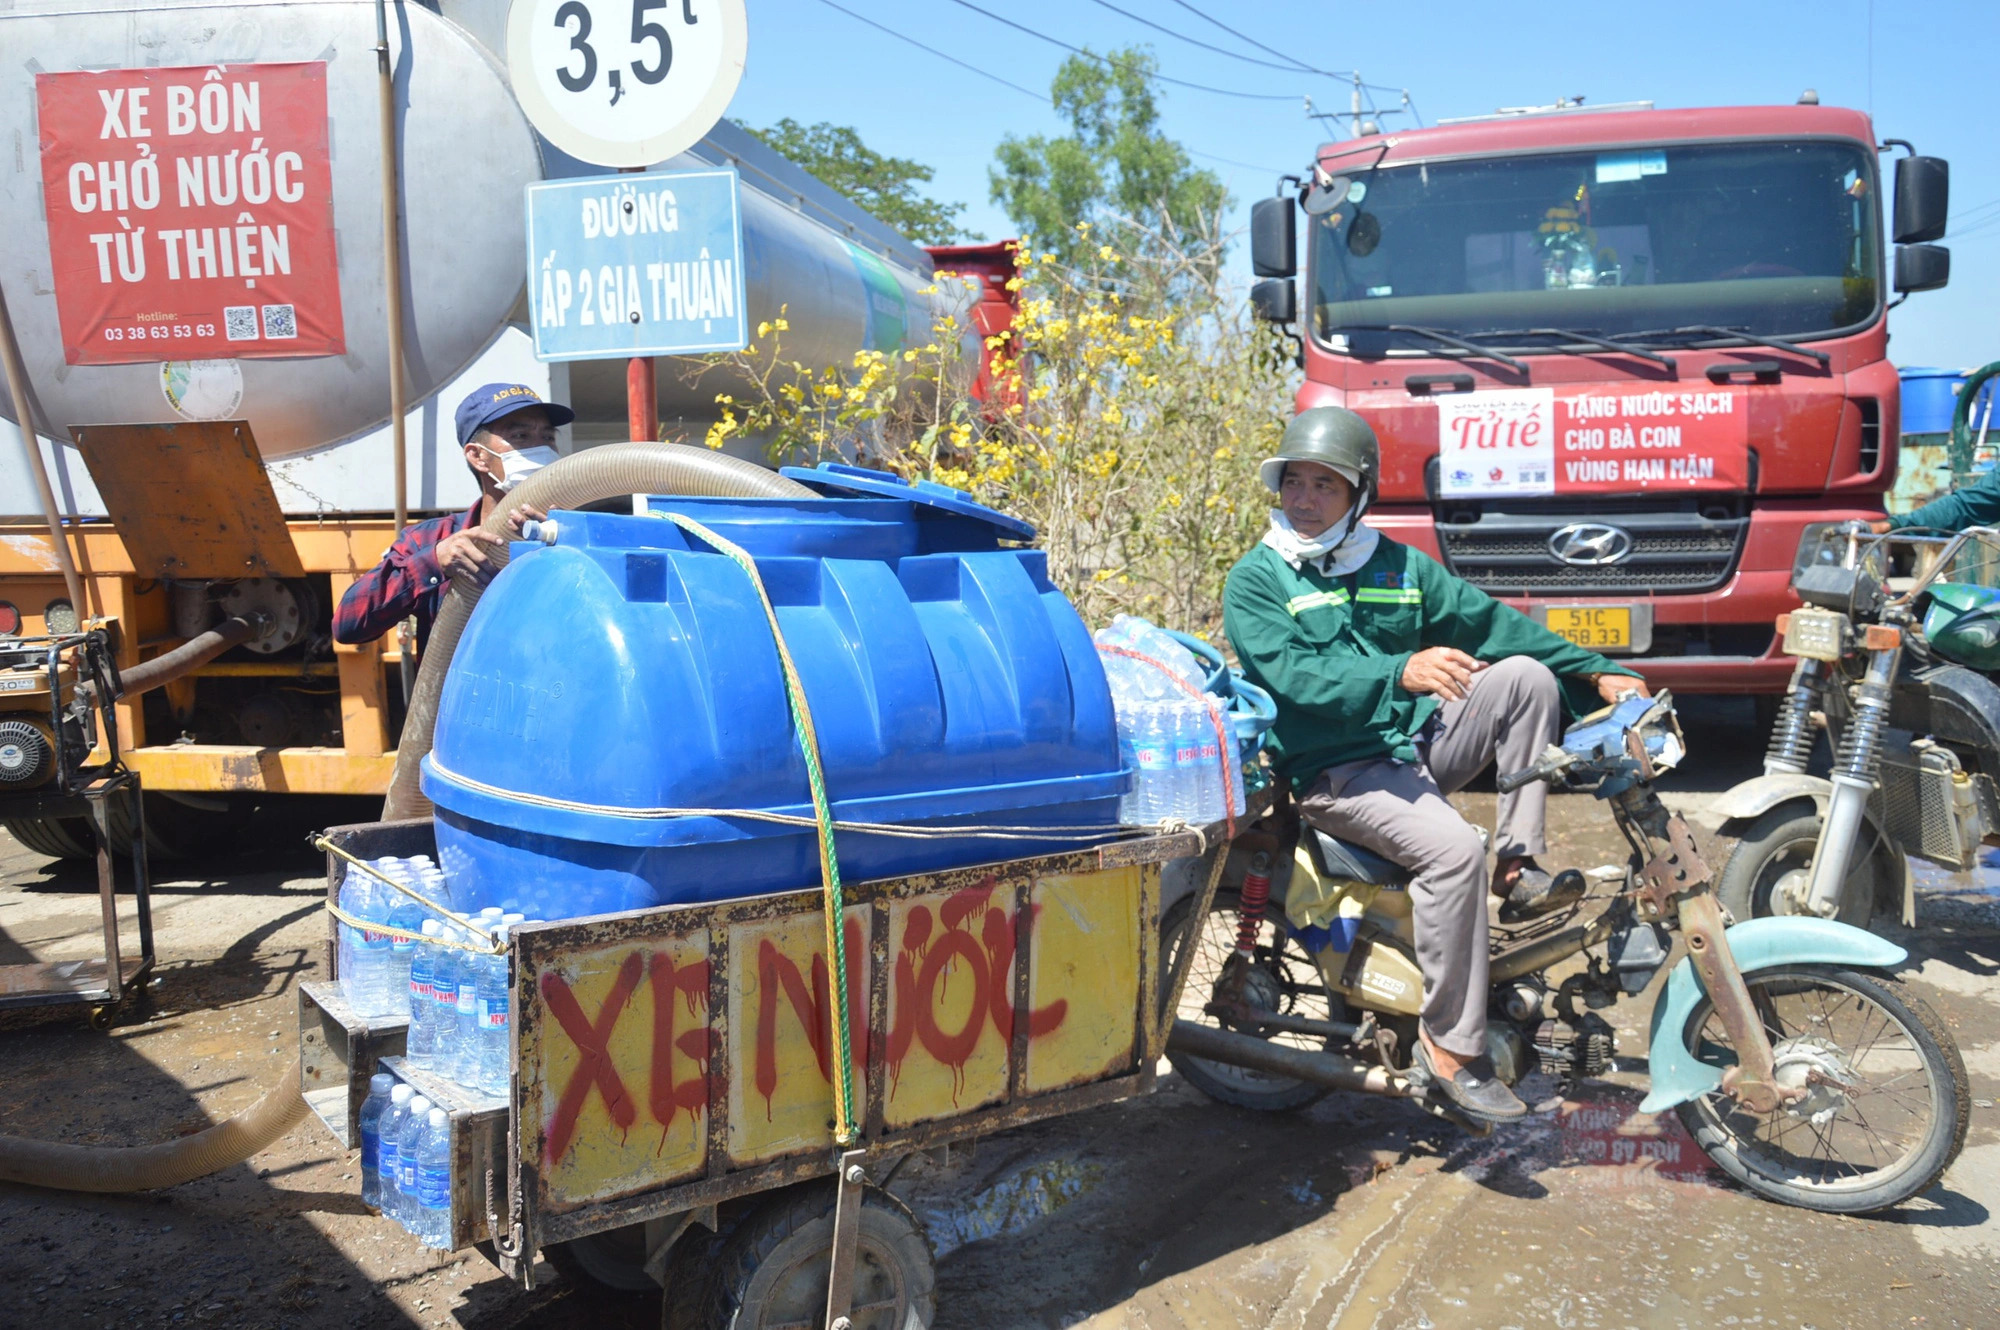 Donors across Vietnam daily send dozens of tank trucks containing fresh water to deprived districts in the eastern part of Tien Giang Province, southern Vietnam to cope with the on-going shortage of fresh water there. Photo: Mau Truong / Tuoi Tre